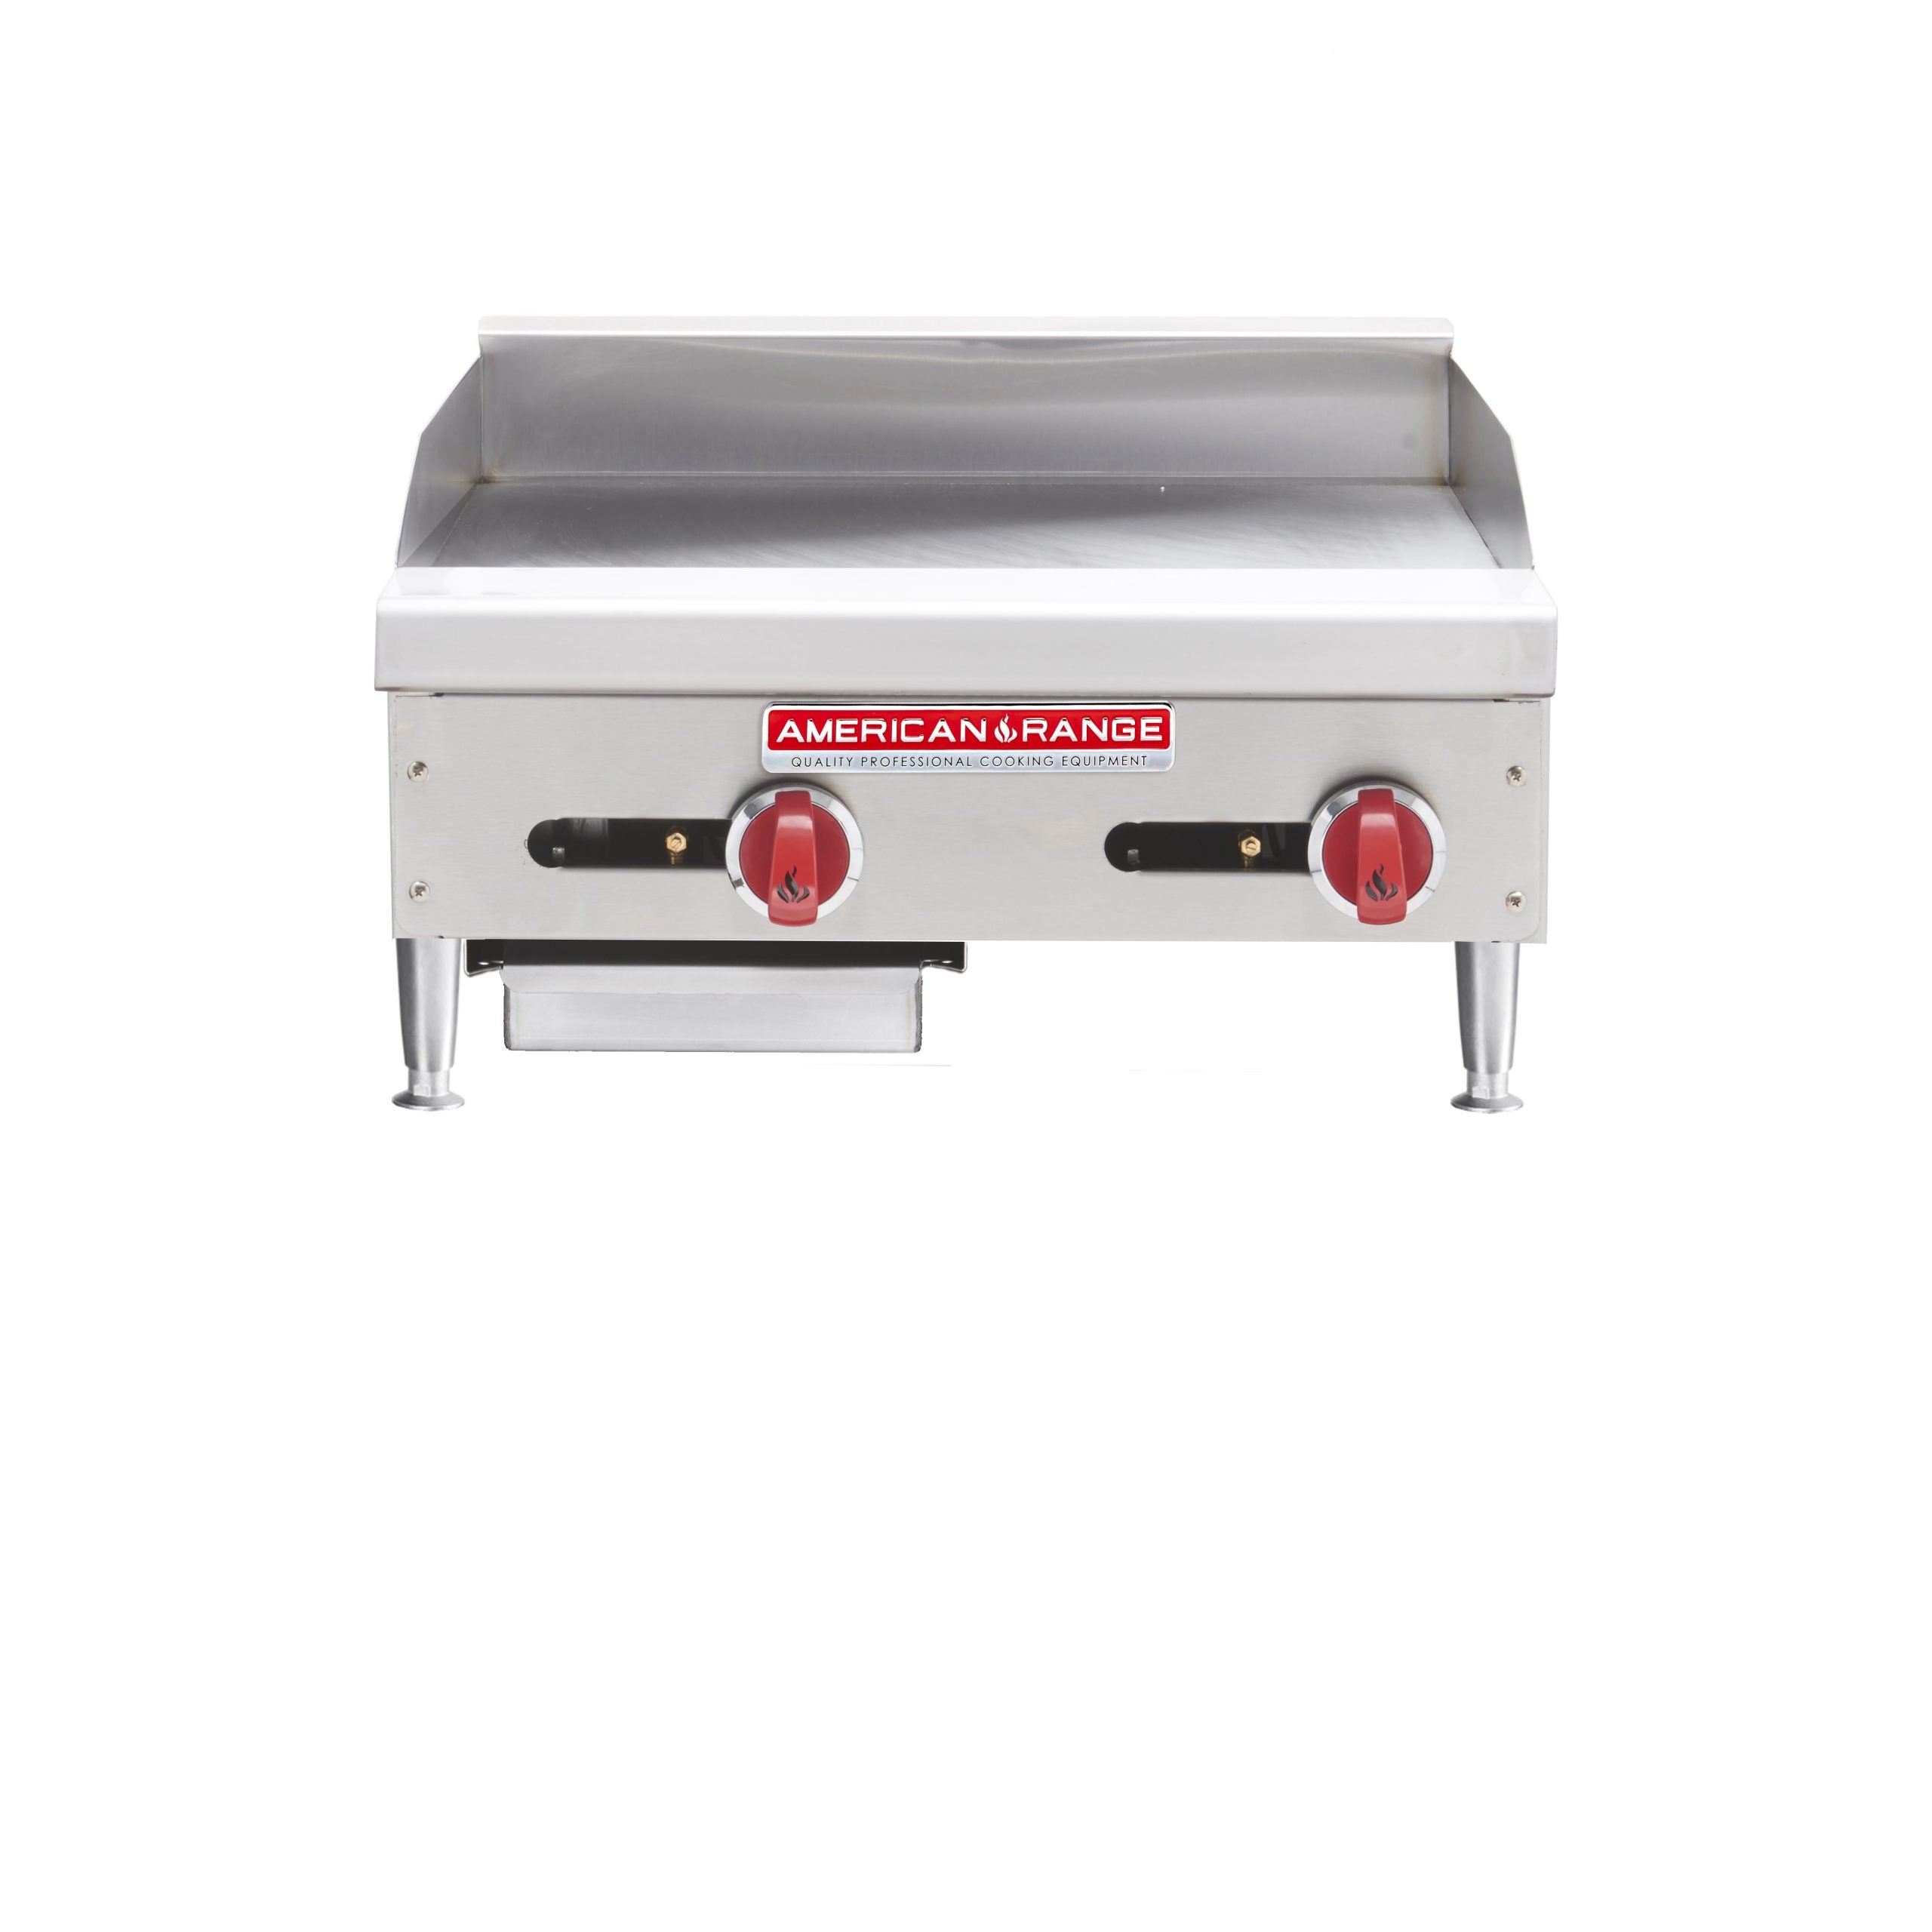 American Range AEMG24 24" Gas Griddle w/ Manual Controls - 3/4" Steel Plate , Natural Gas